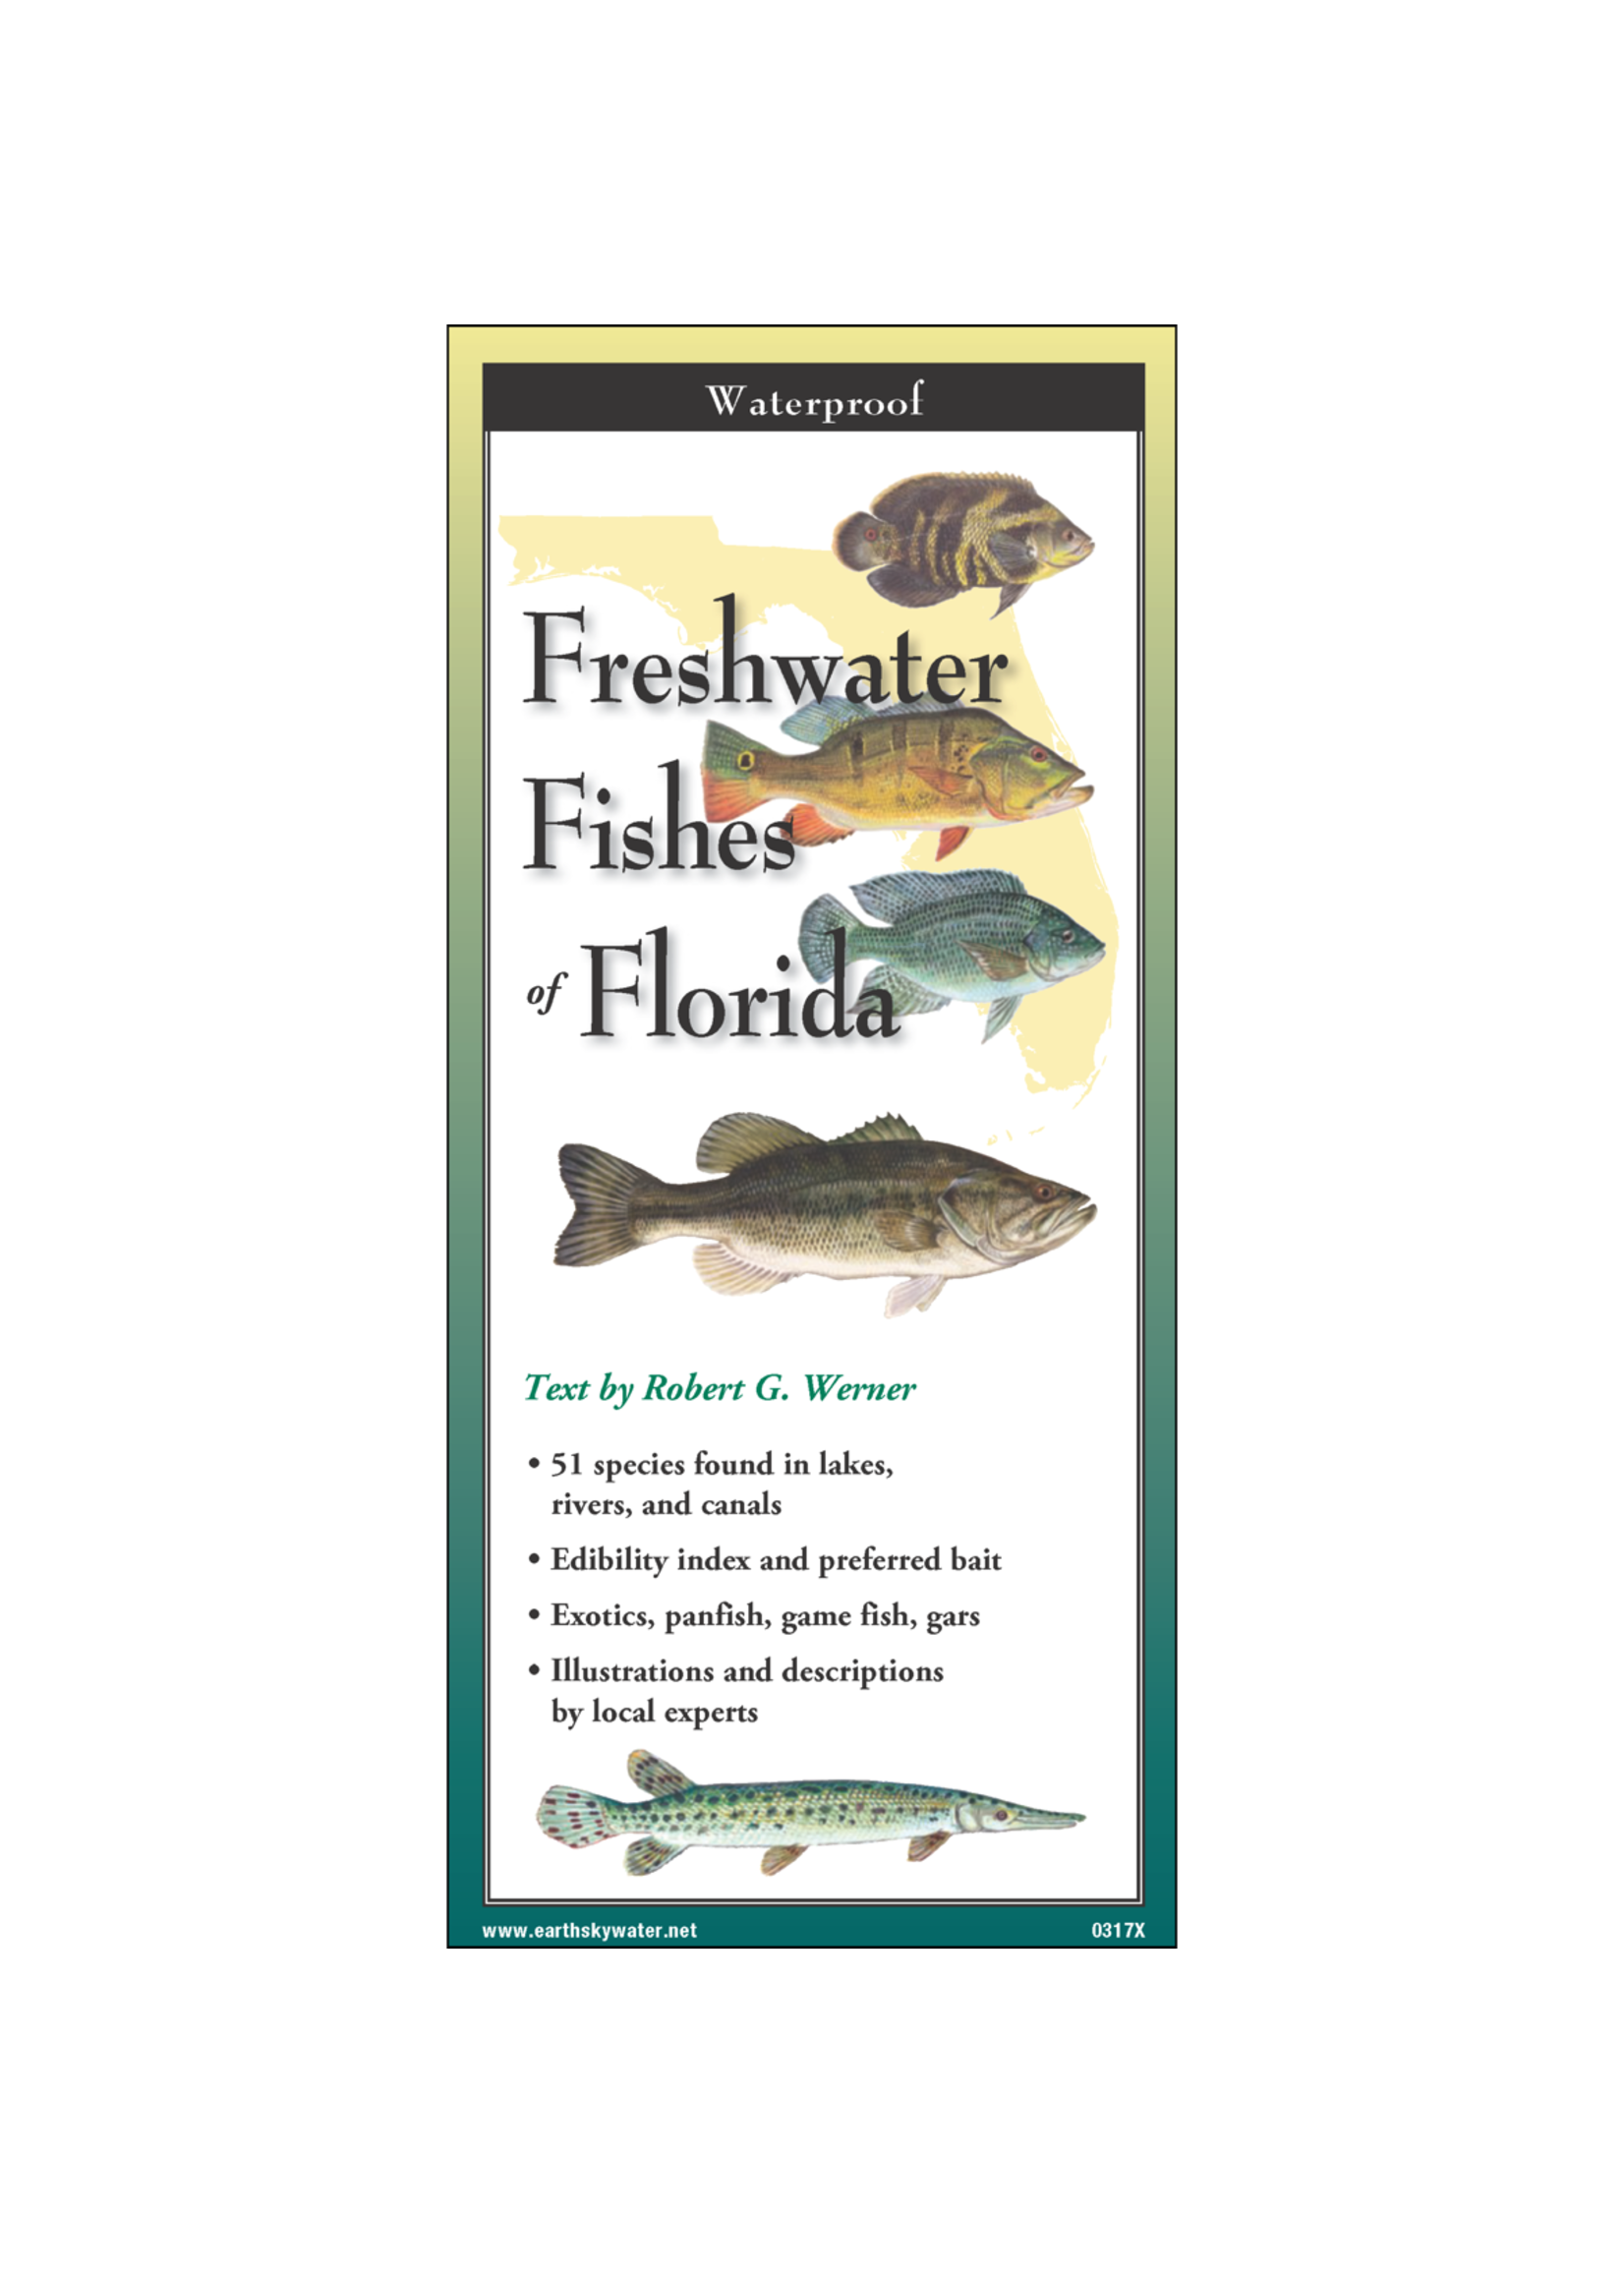 Earth Sky + Water Florida's Freshwater Fishes